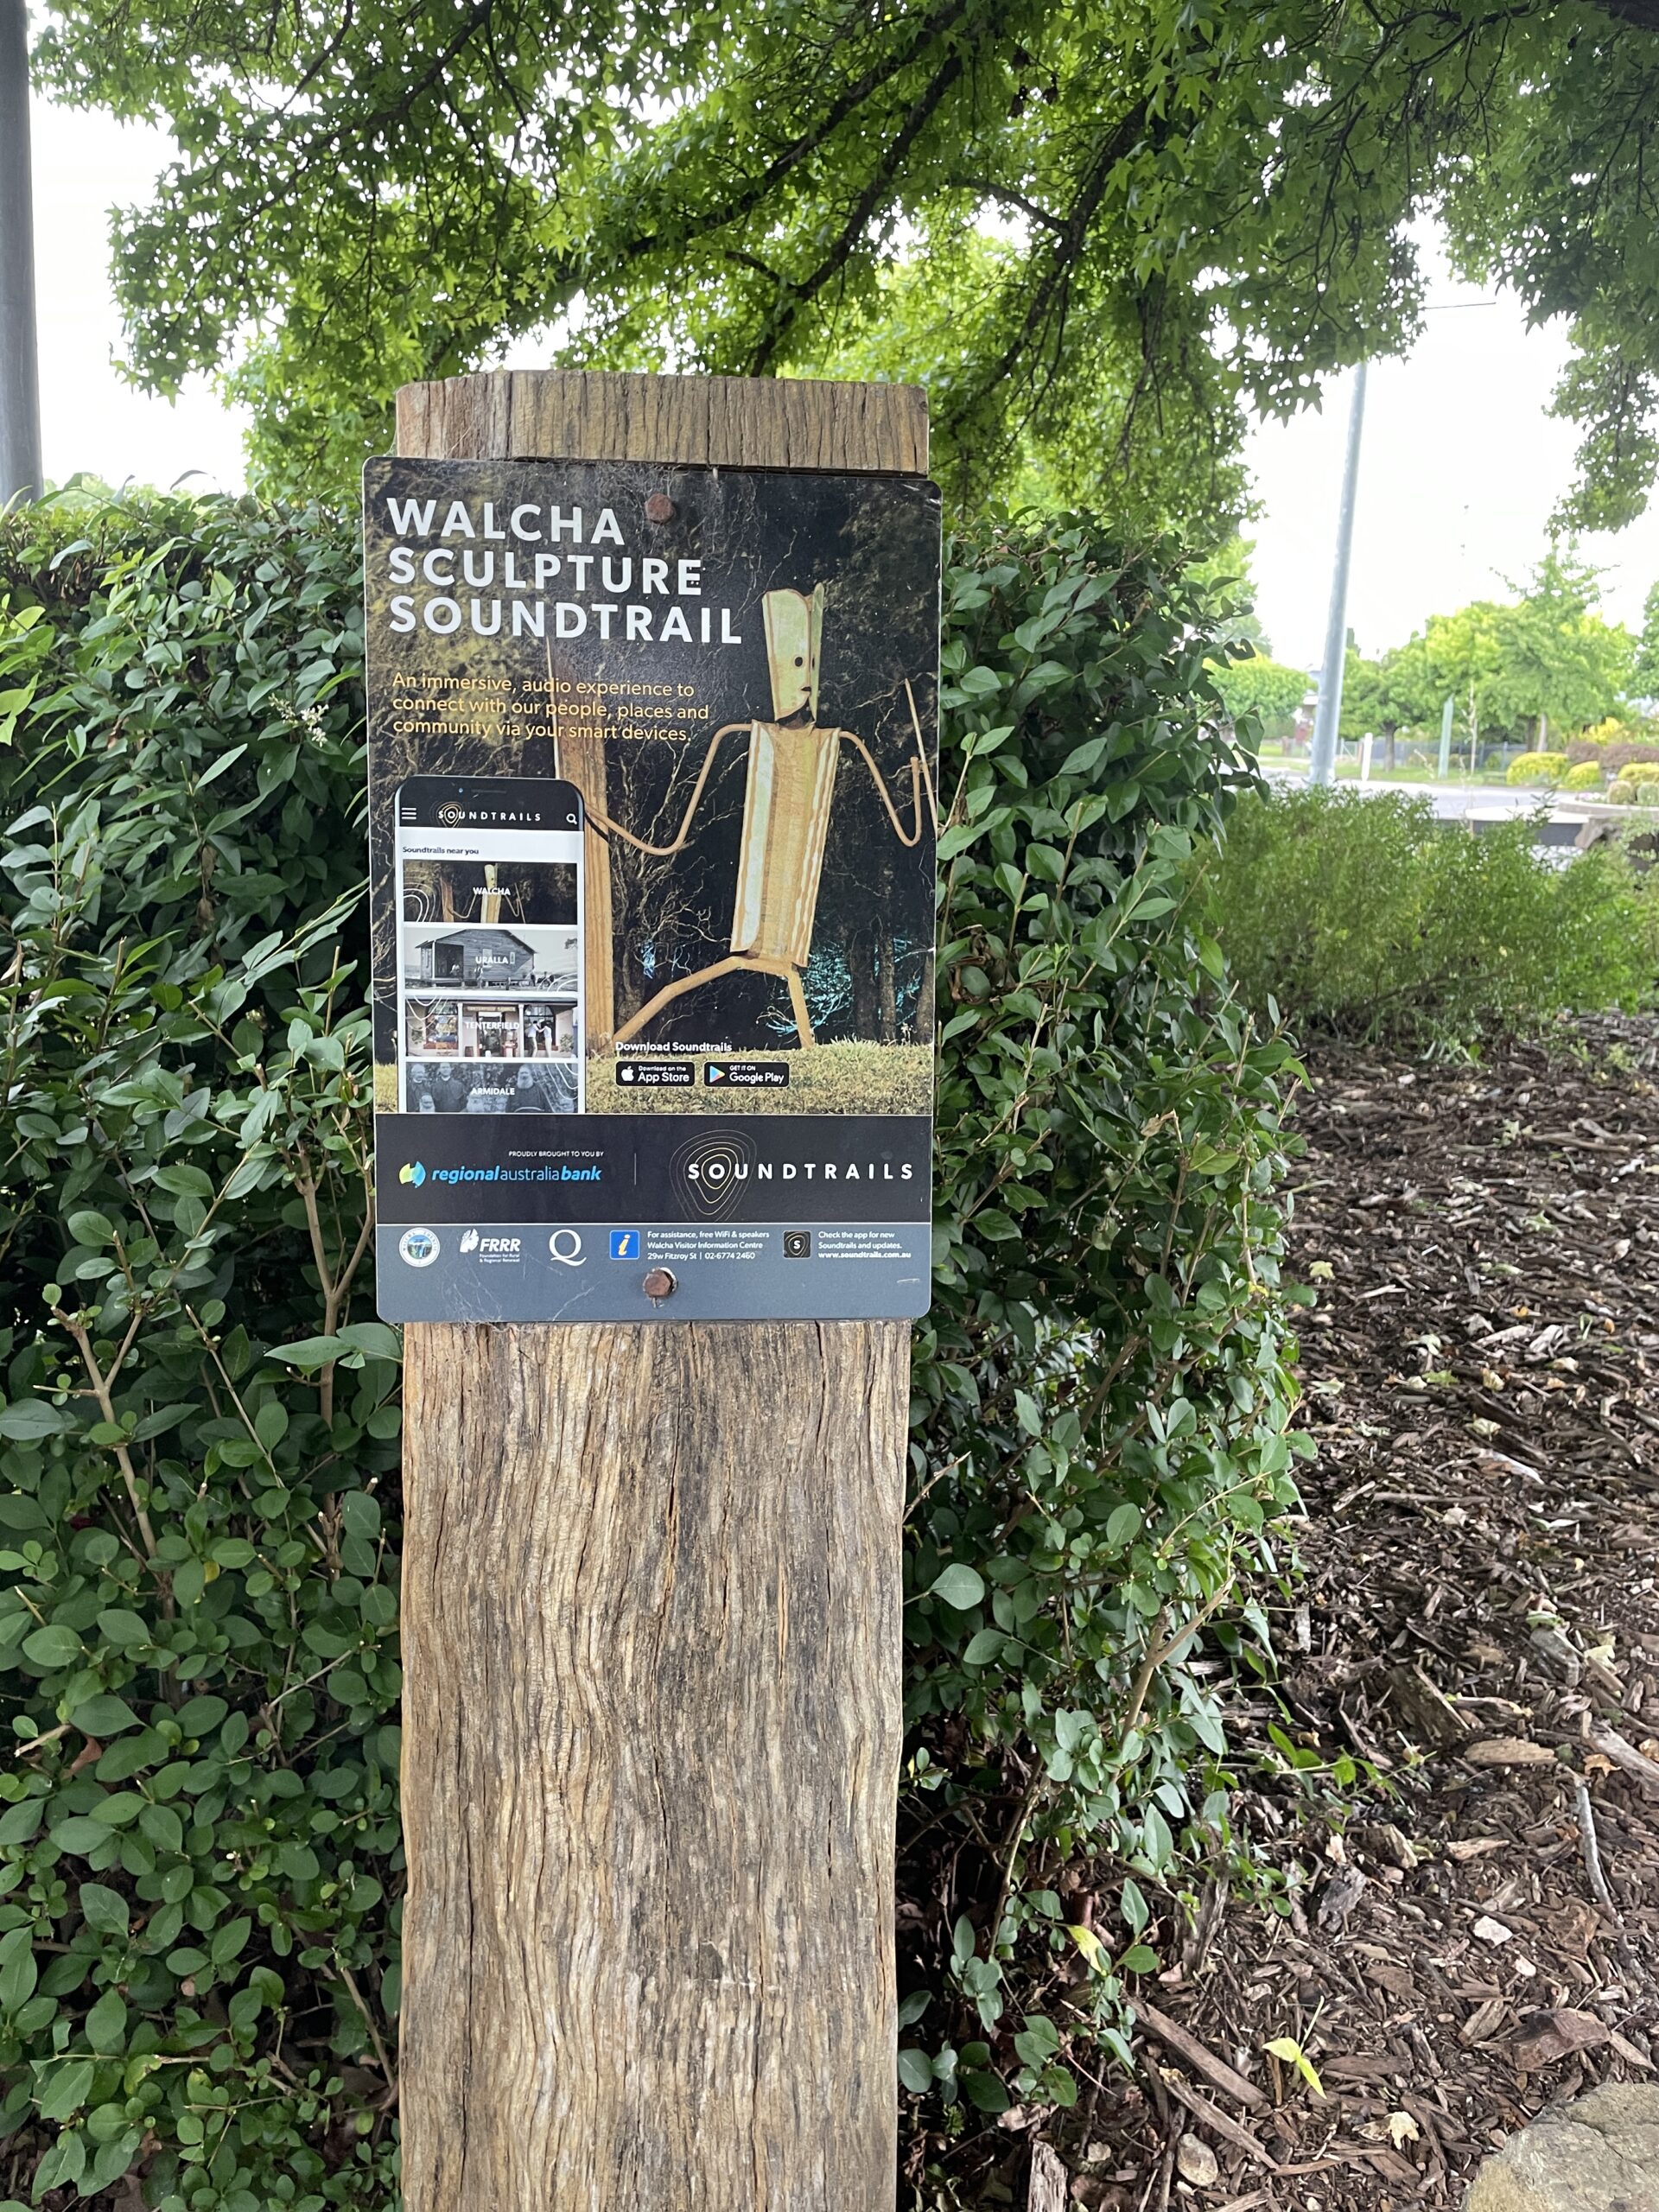 Large wooden post with a sign for the Walcha Sculpture Walk displaying a wooden sculpture and text.